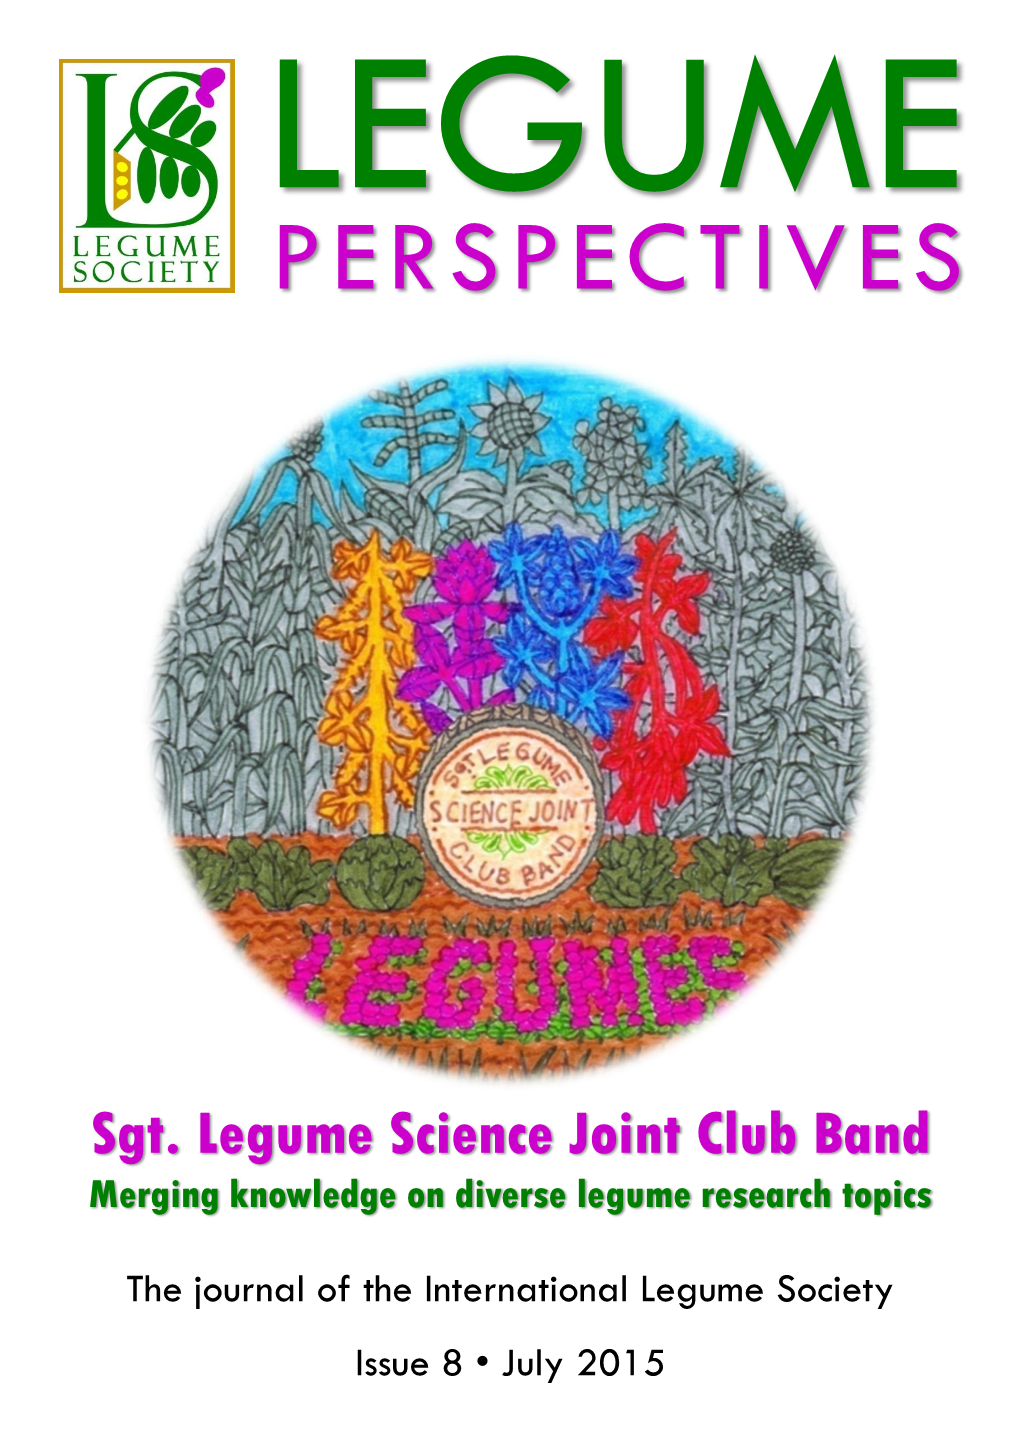 Sgt. Legume Science Joint Club Band Merging Knowledge on Diverse Legume Research Topics